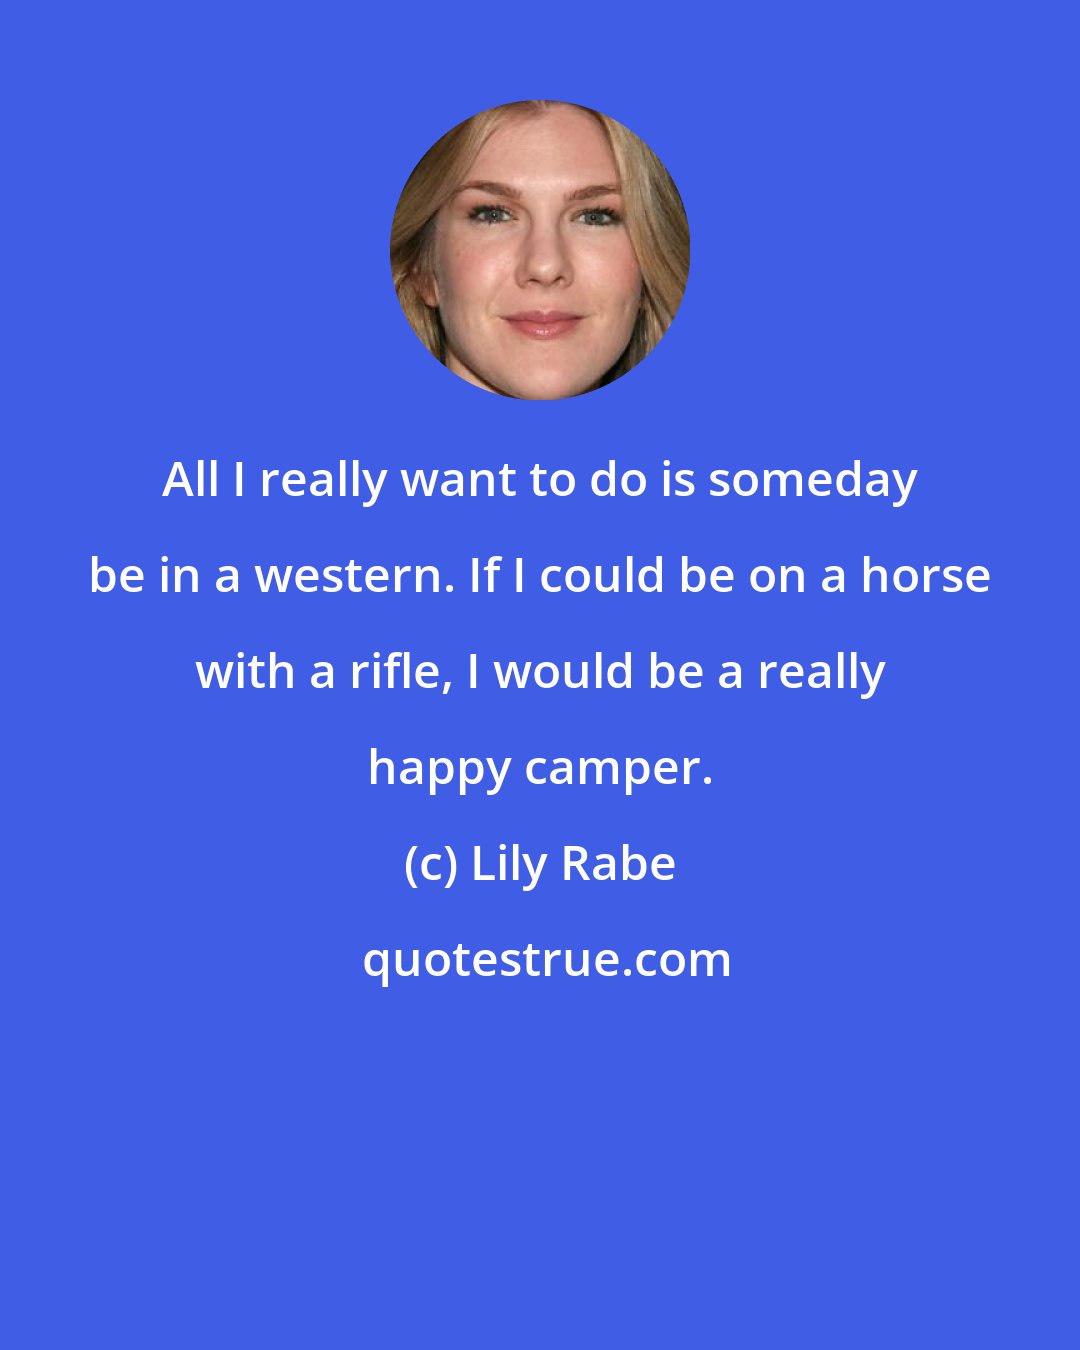 Lily Rabe: All I really want to do is someday be in a western. If I could be on a horse with a rifle, I would be a really happy camper.